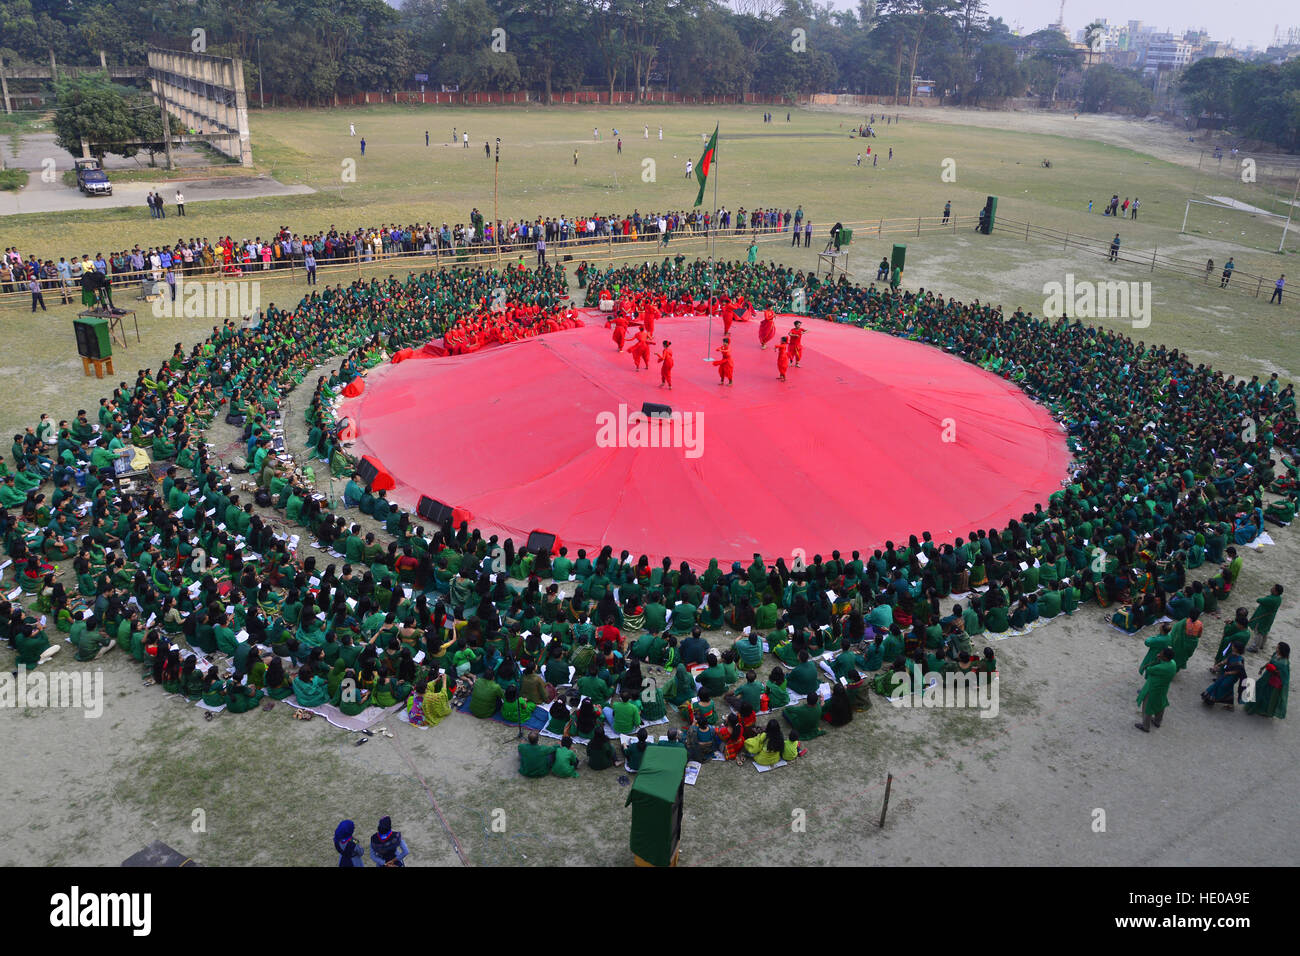 Dhaka, Bangladesh. 16th Dec, 2016. Bangladeshi Cultural Organization Chayanot organized a cultural program at Dhaka University play ground during the Victory Day celebrations in Dhaka, Bangladesh. On December 16, 2016  Bangladesh marks its 45th Victory Day to commemorate the victory of the Allied forces High Command over the Pakistani forces in the Bangladesh Liberation War in 1971. Bangladesh became a free nation on 16 December 1971 after a nine-month bloody war with Pakistan. © Mamunur Rashid/Alamy Live News Stock Photo